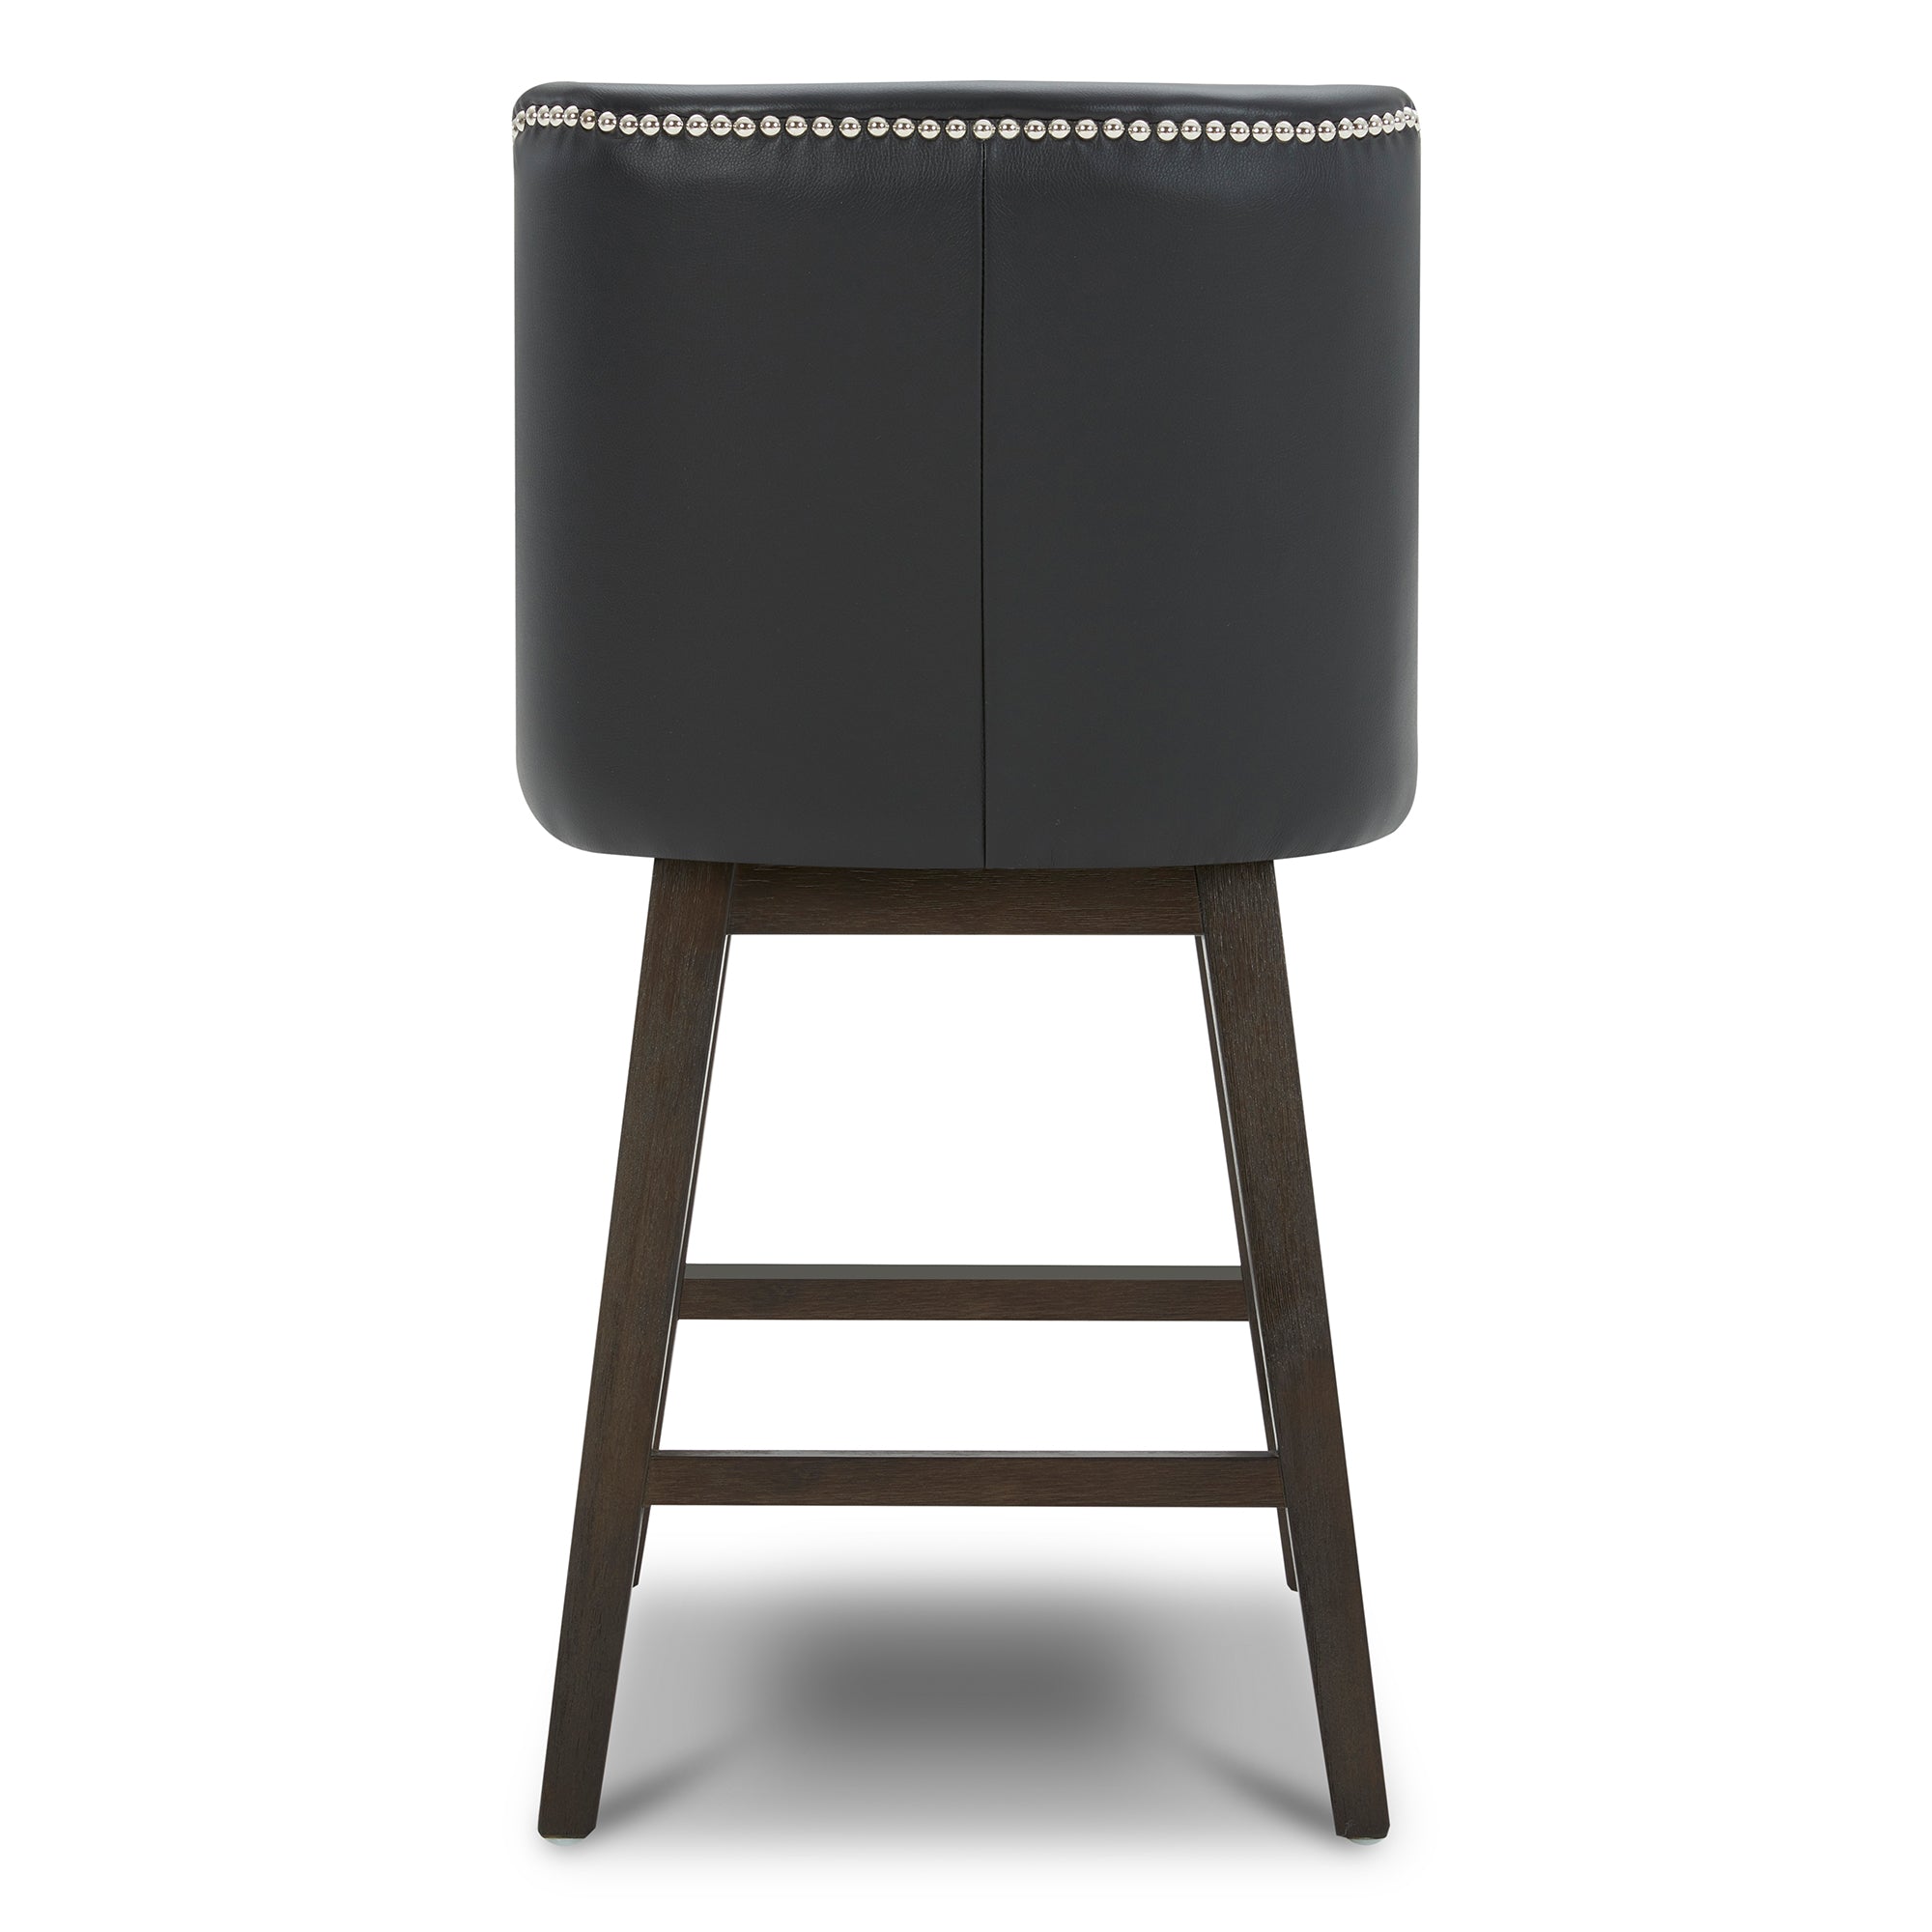 CHITA LIVING-Asher Swivel Counter Stool with Nailhead Trim( Set of 2)-Counter Stools-Faux Leather-Black-